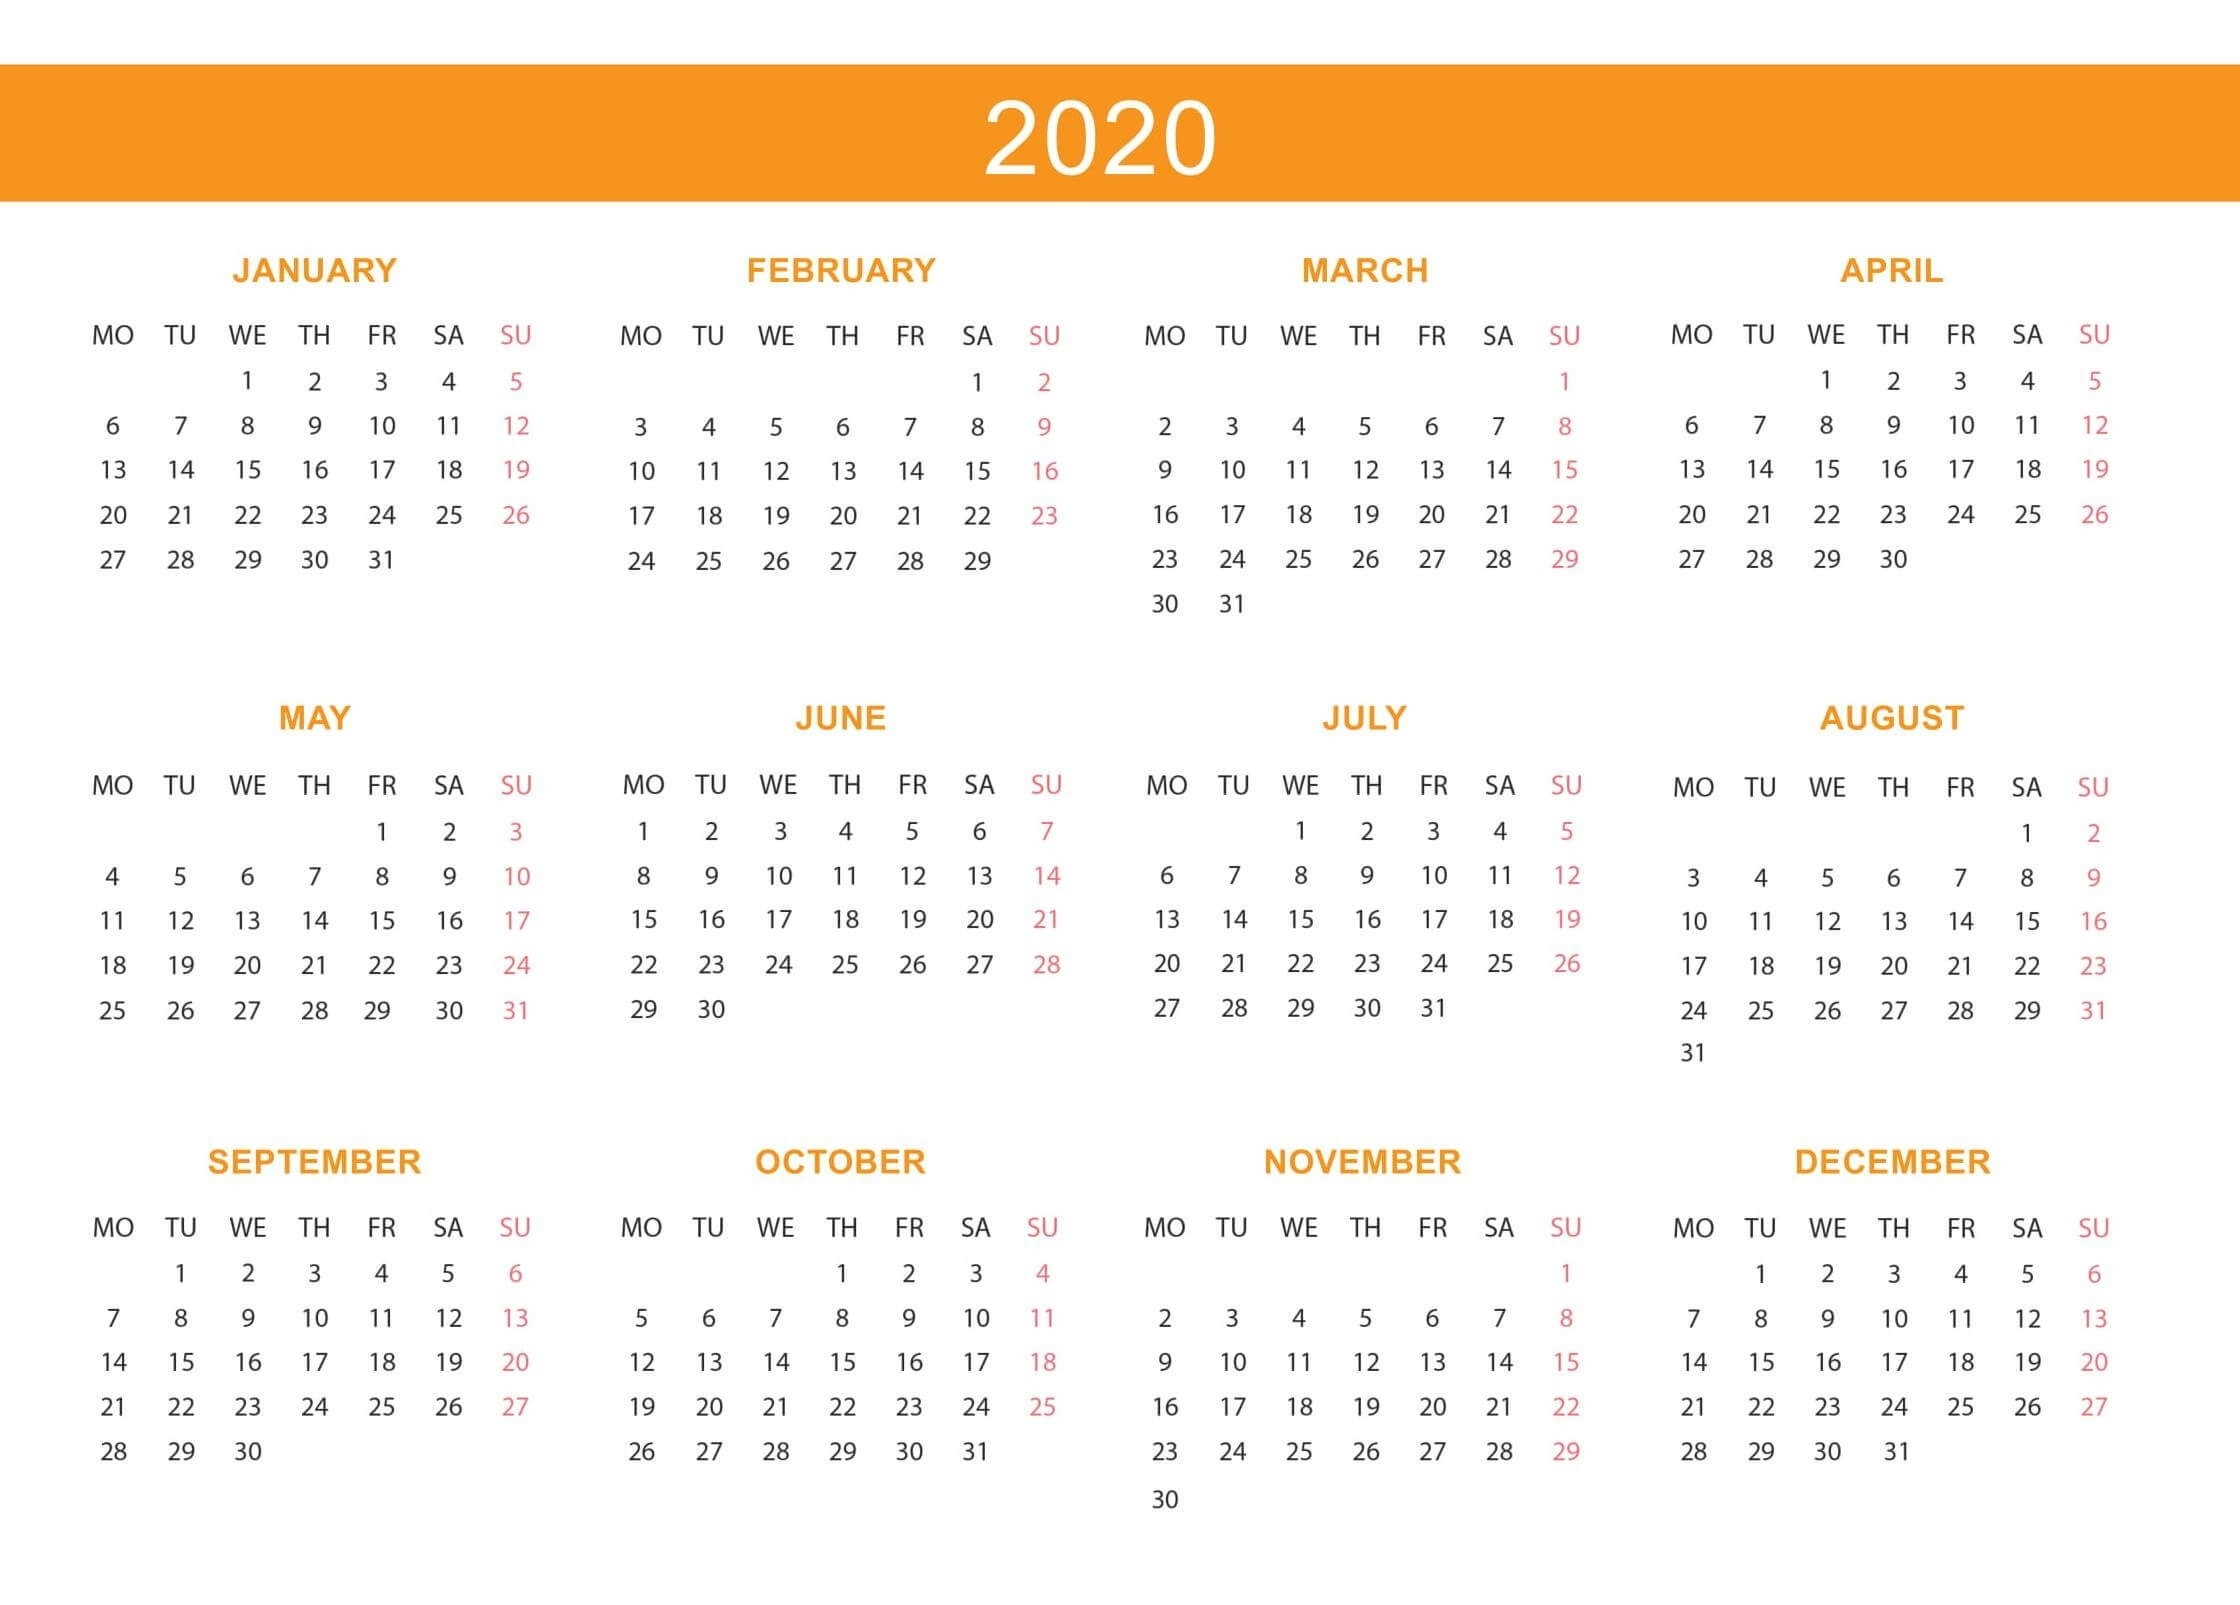 Free Yearly Calendar 2020 With Notes - 2019 Calendars For School Calendar 2020 South Africa